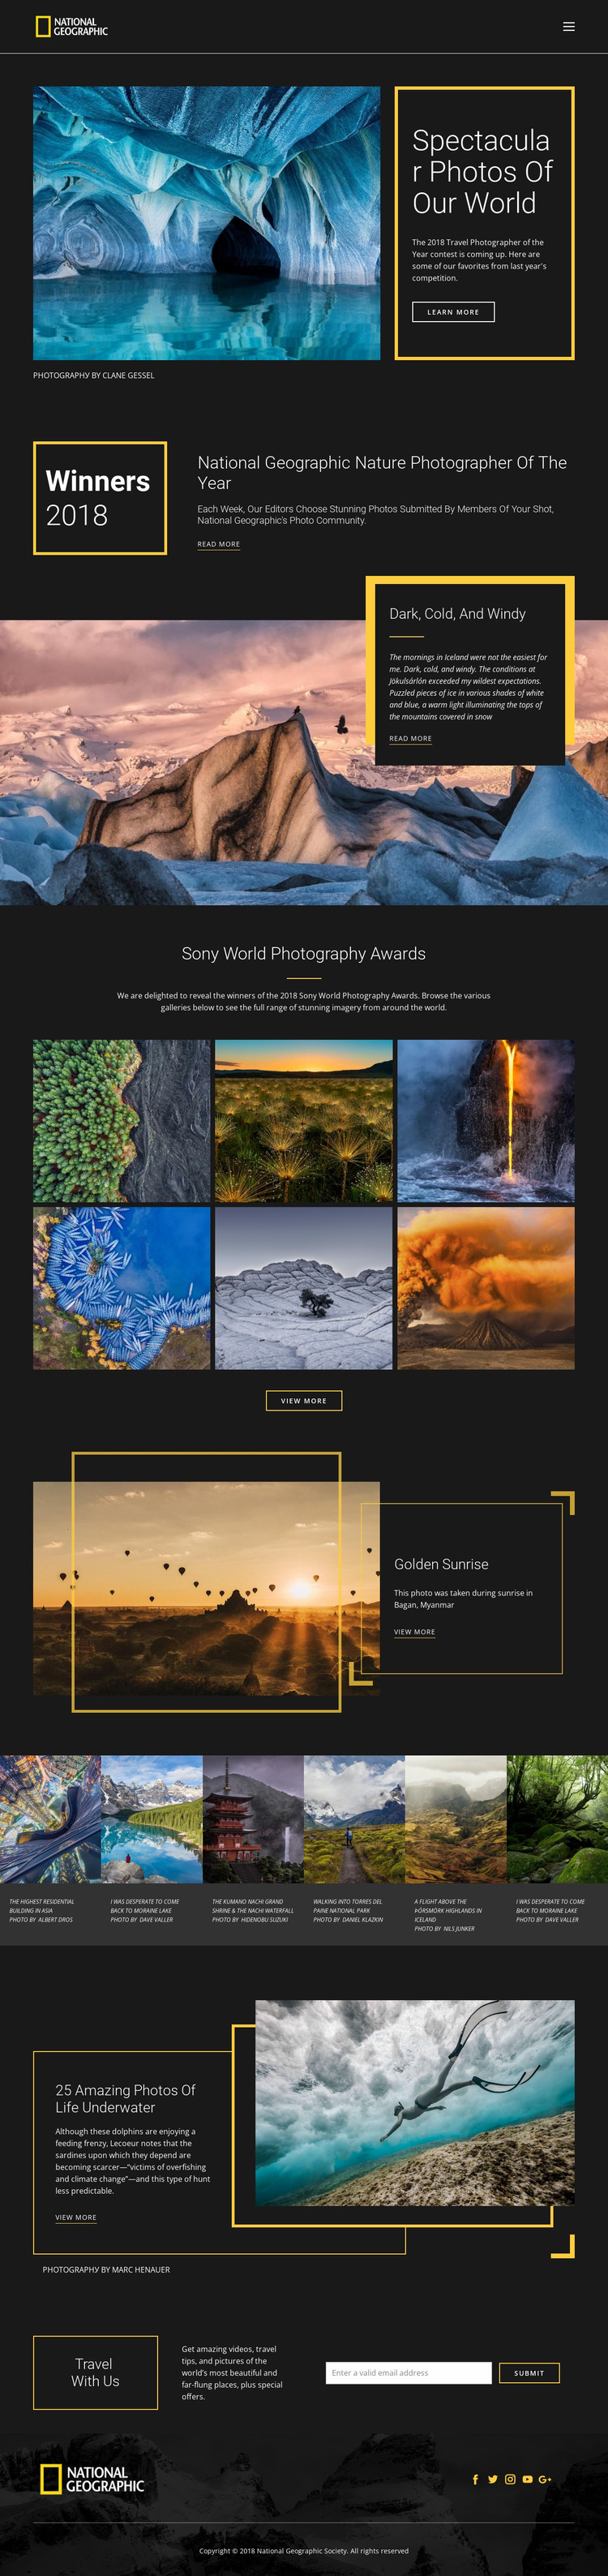 Pictures of nature Html Website Builder